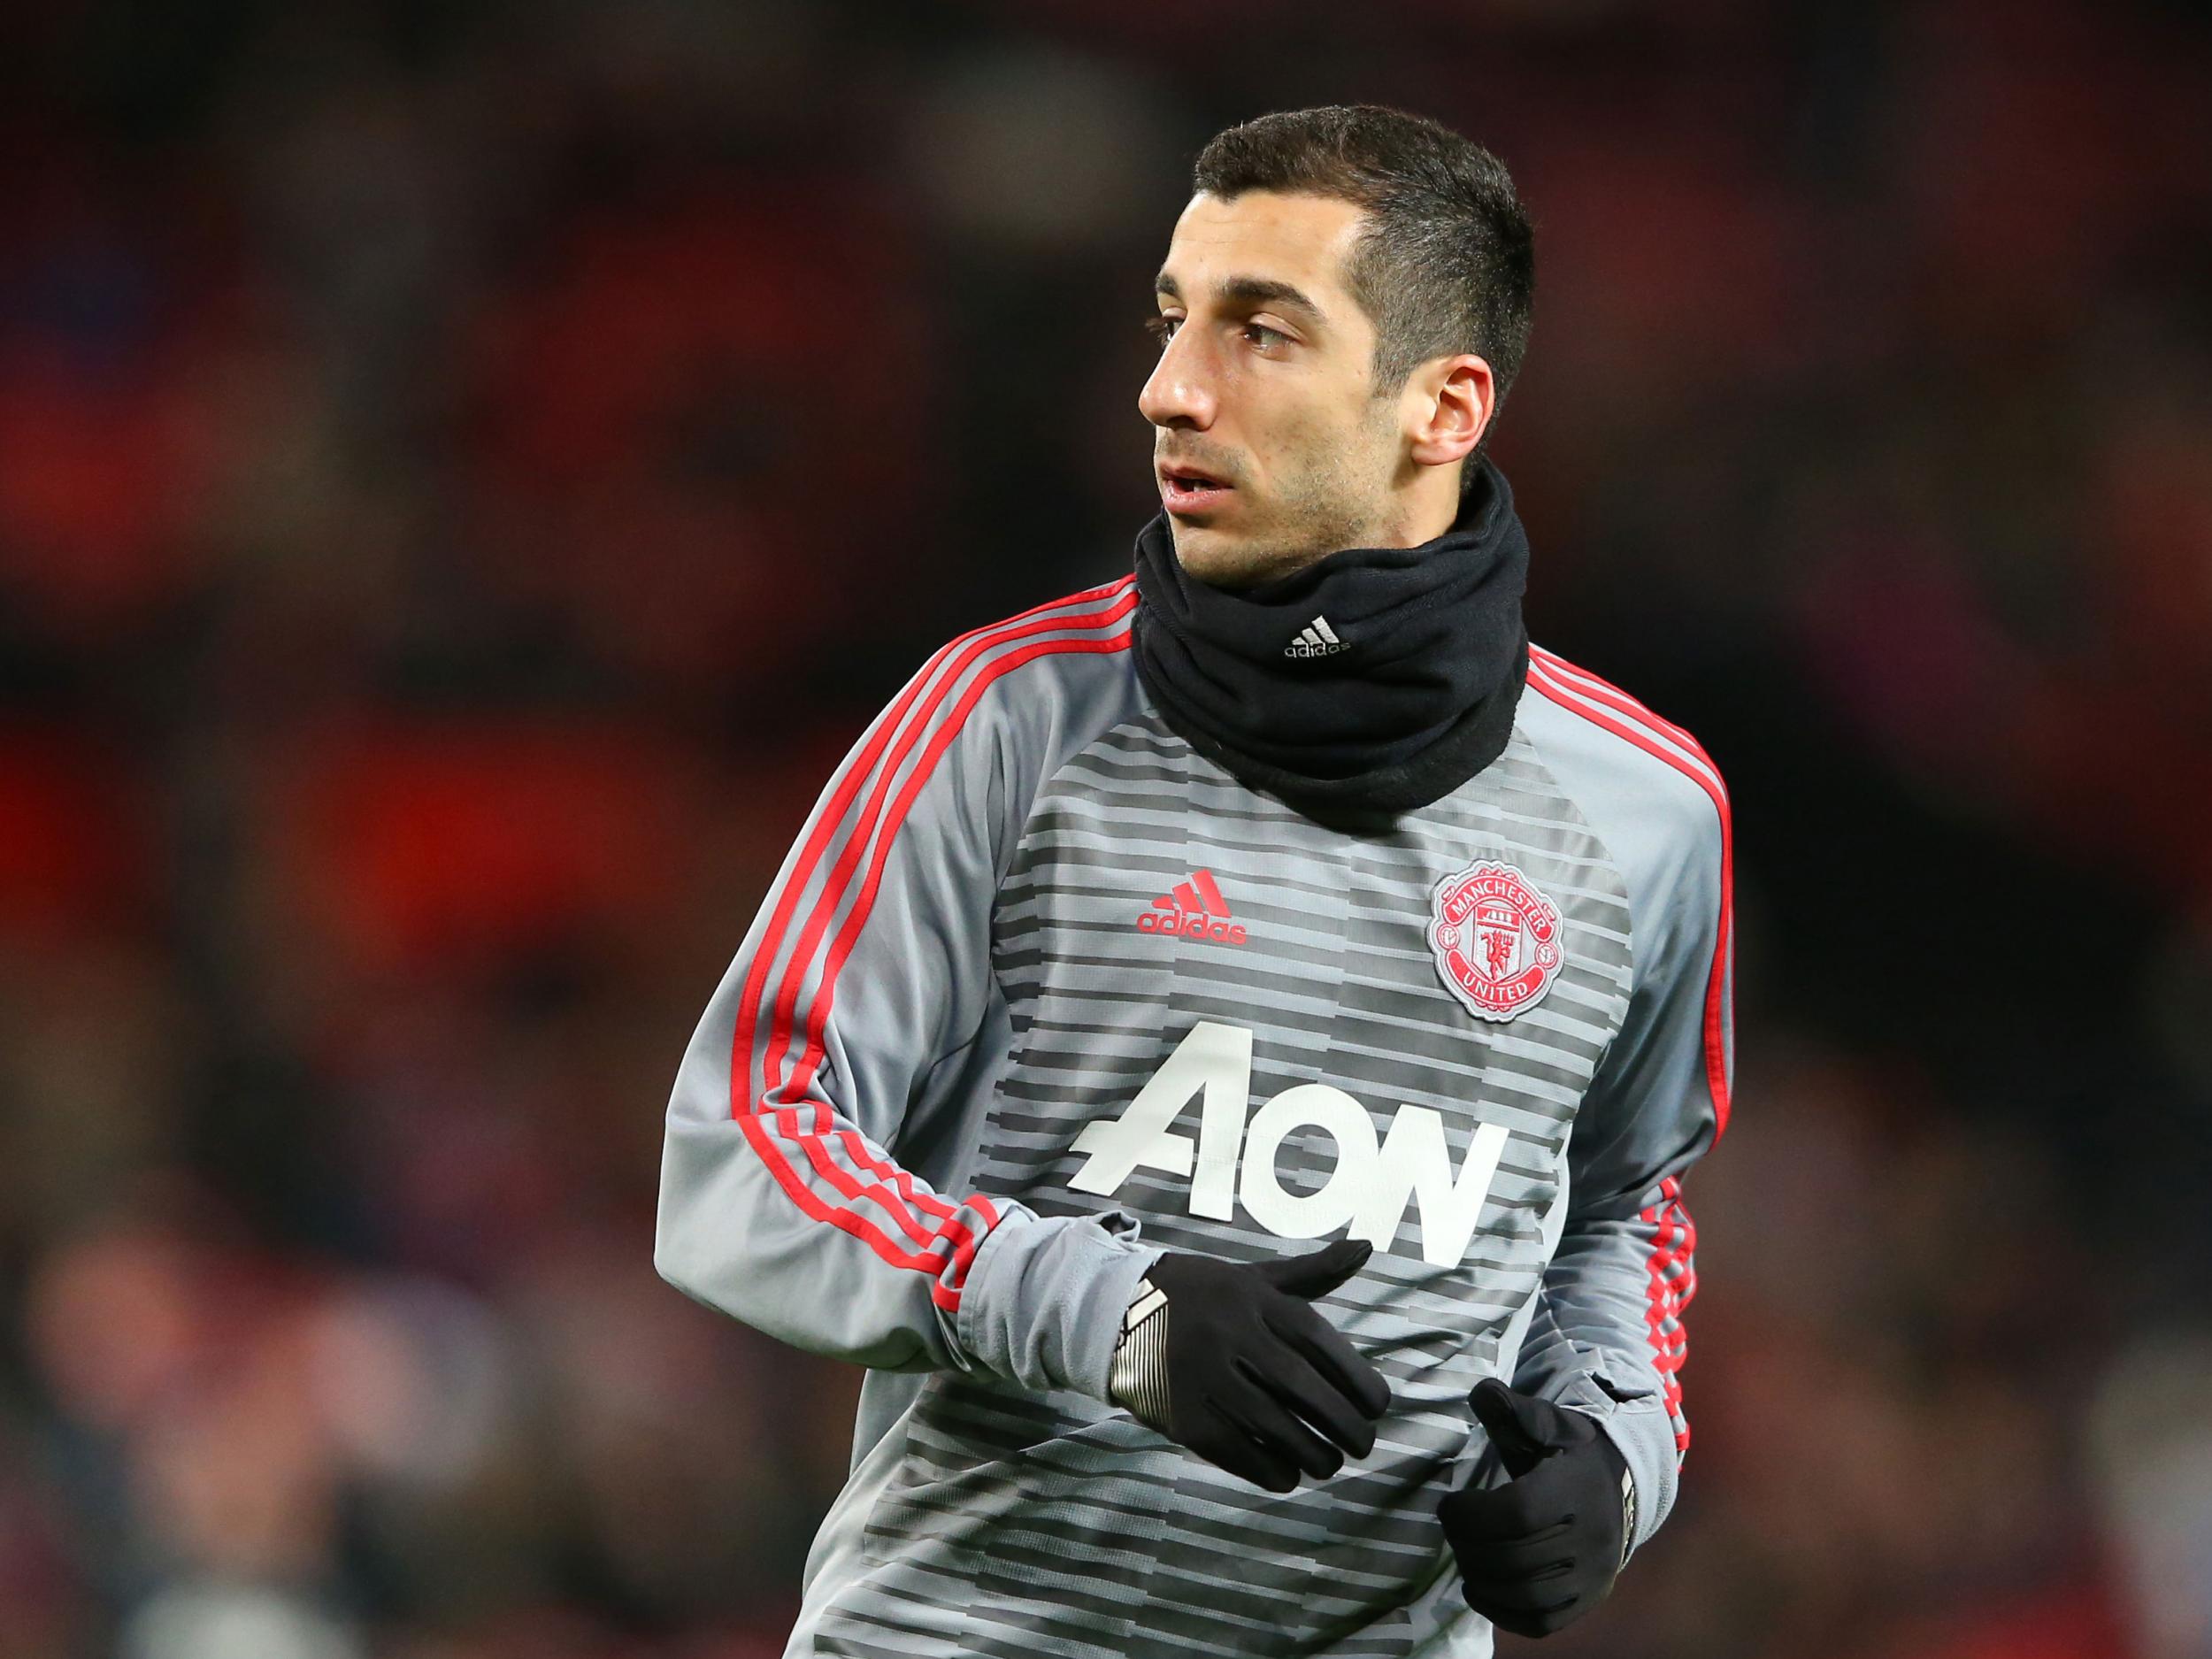 Henrikh Mkhitaryan looks set to leave Old Trafford after falling out of favour